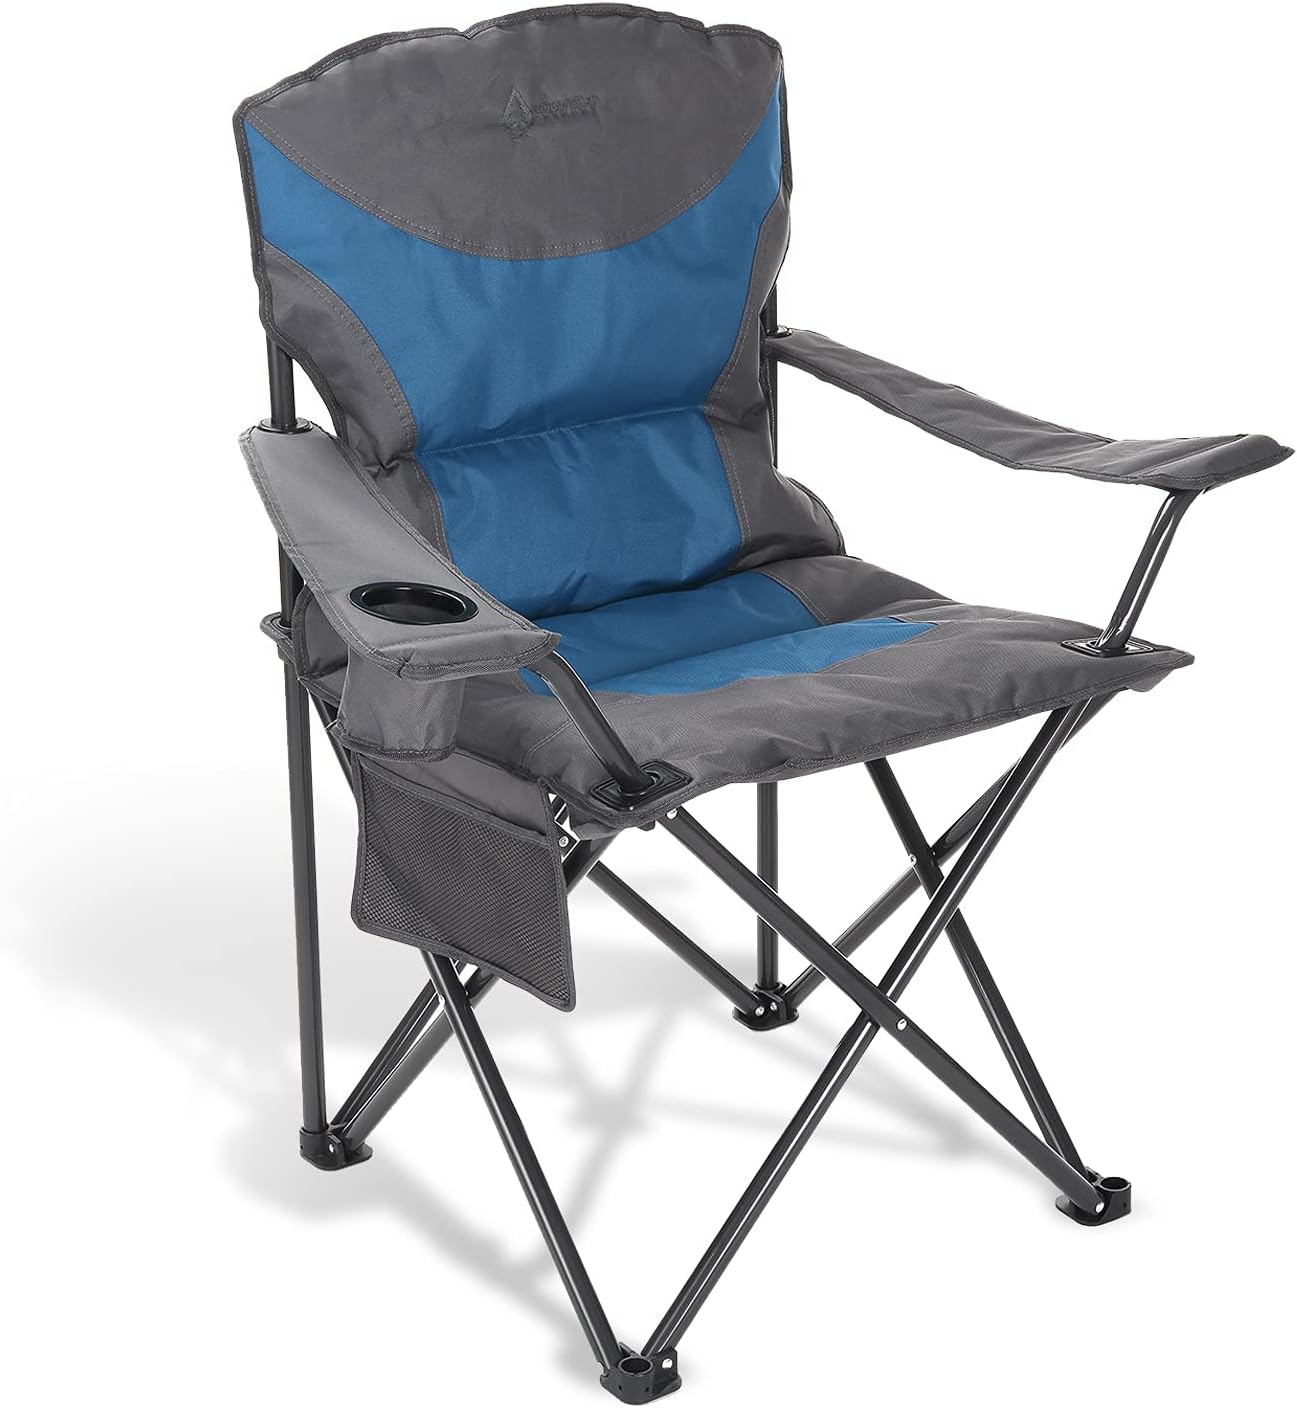 Portable Folding Camping Quad Chair w/Added Ultra-Comfortable Padding